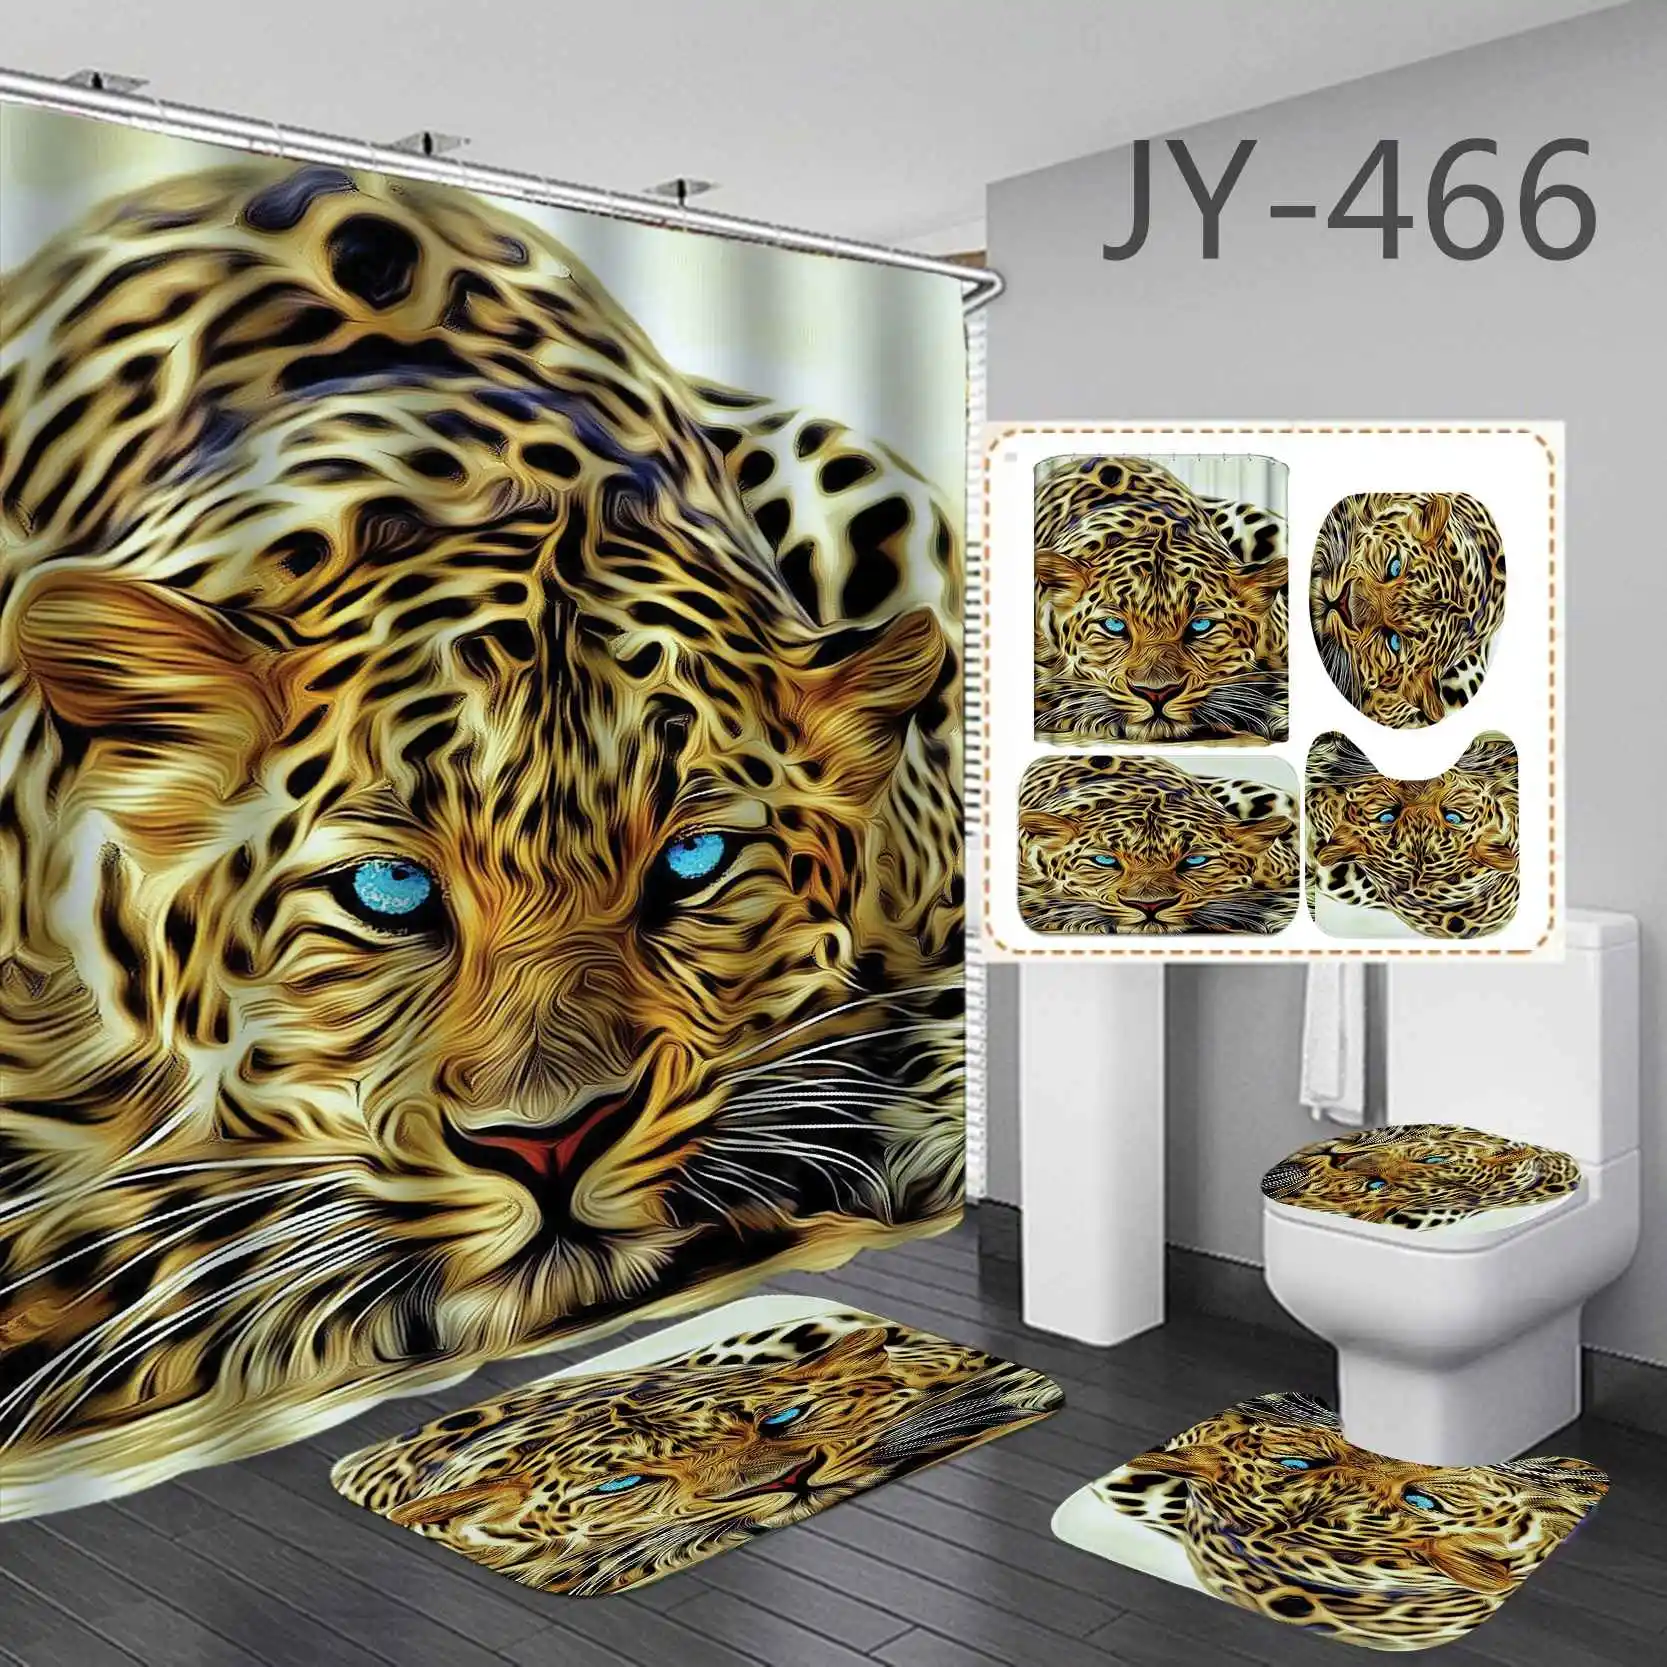 

Majestic animal king of beasts king of the forest tiger lion shower curtain set